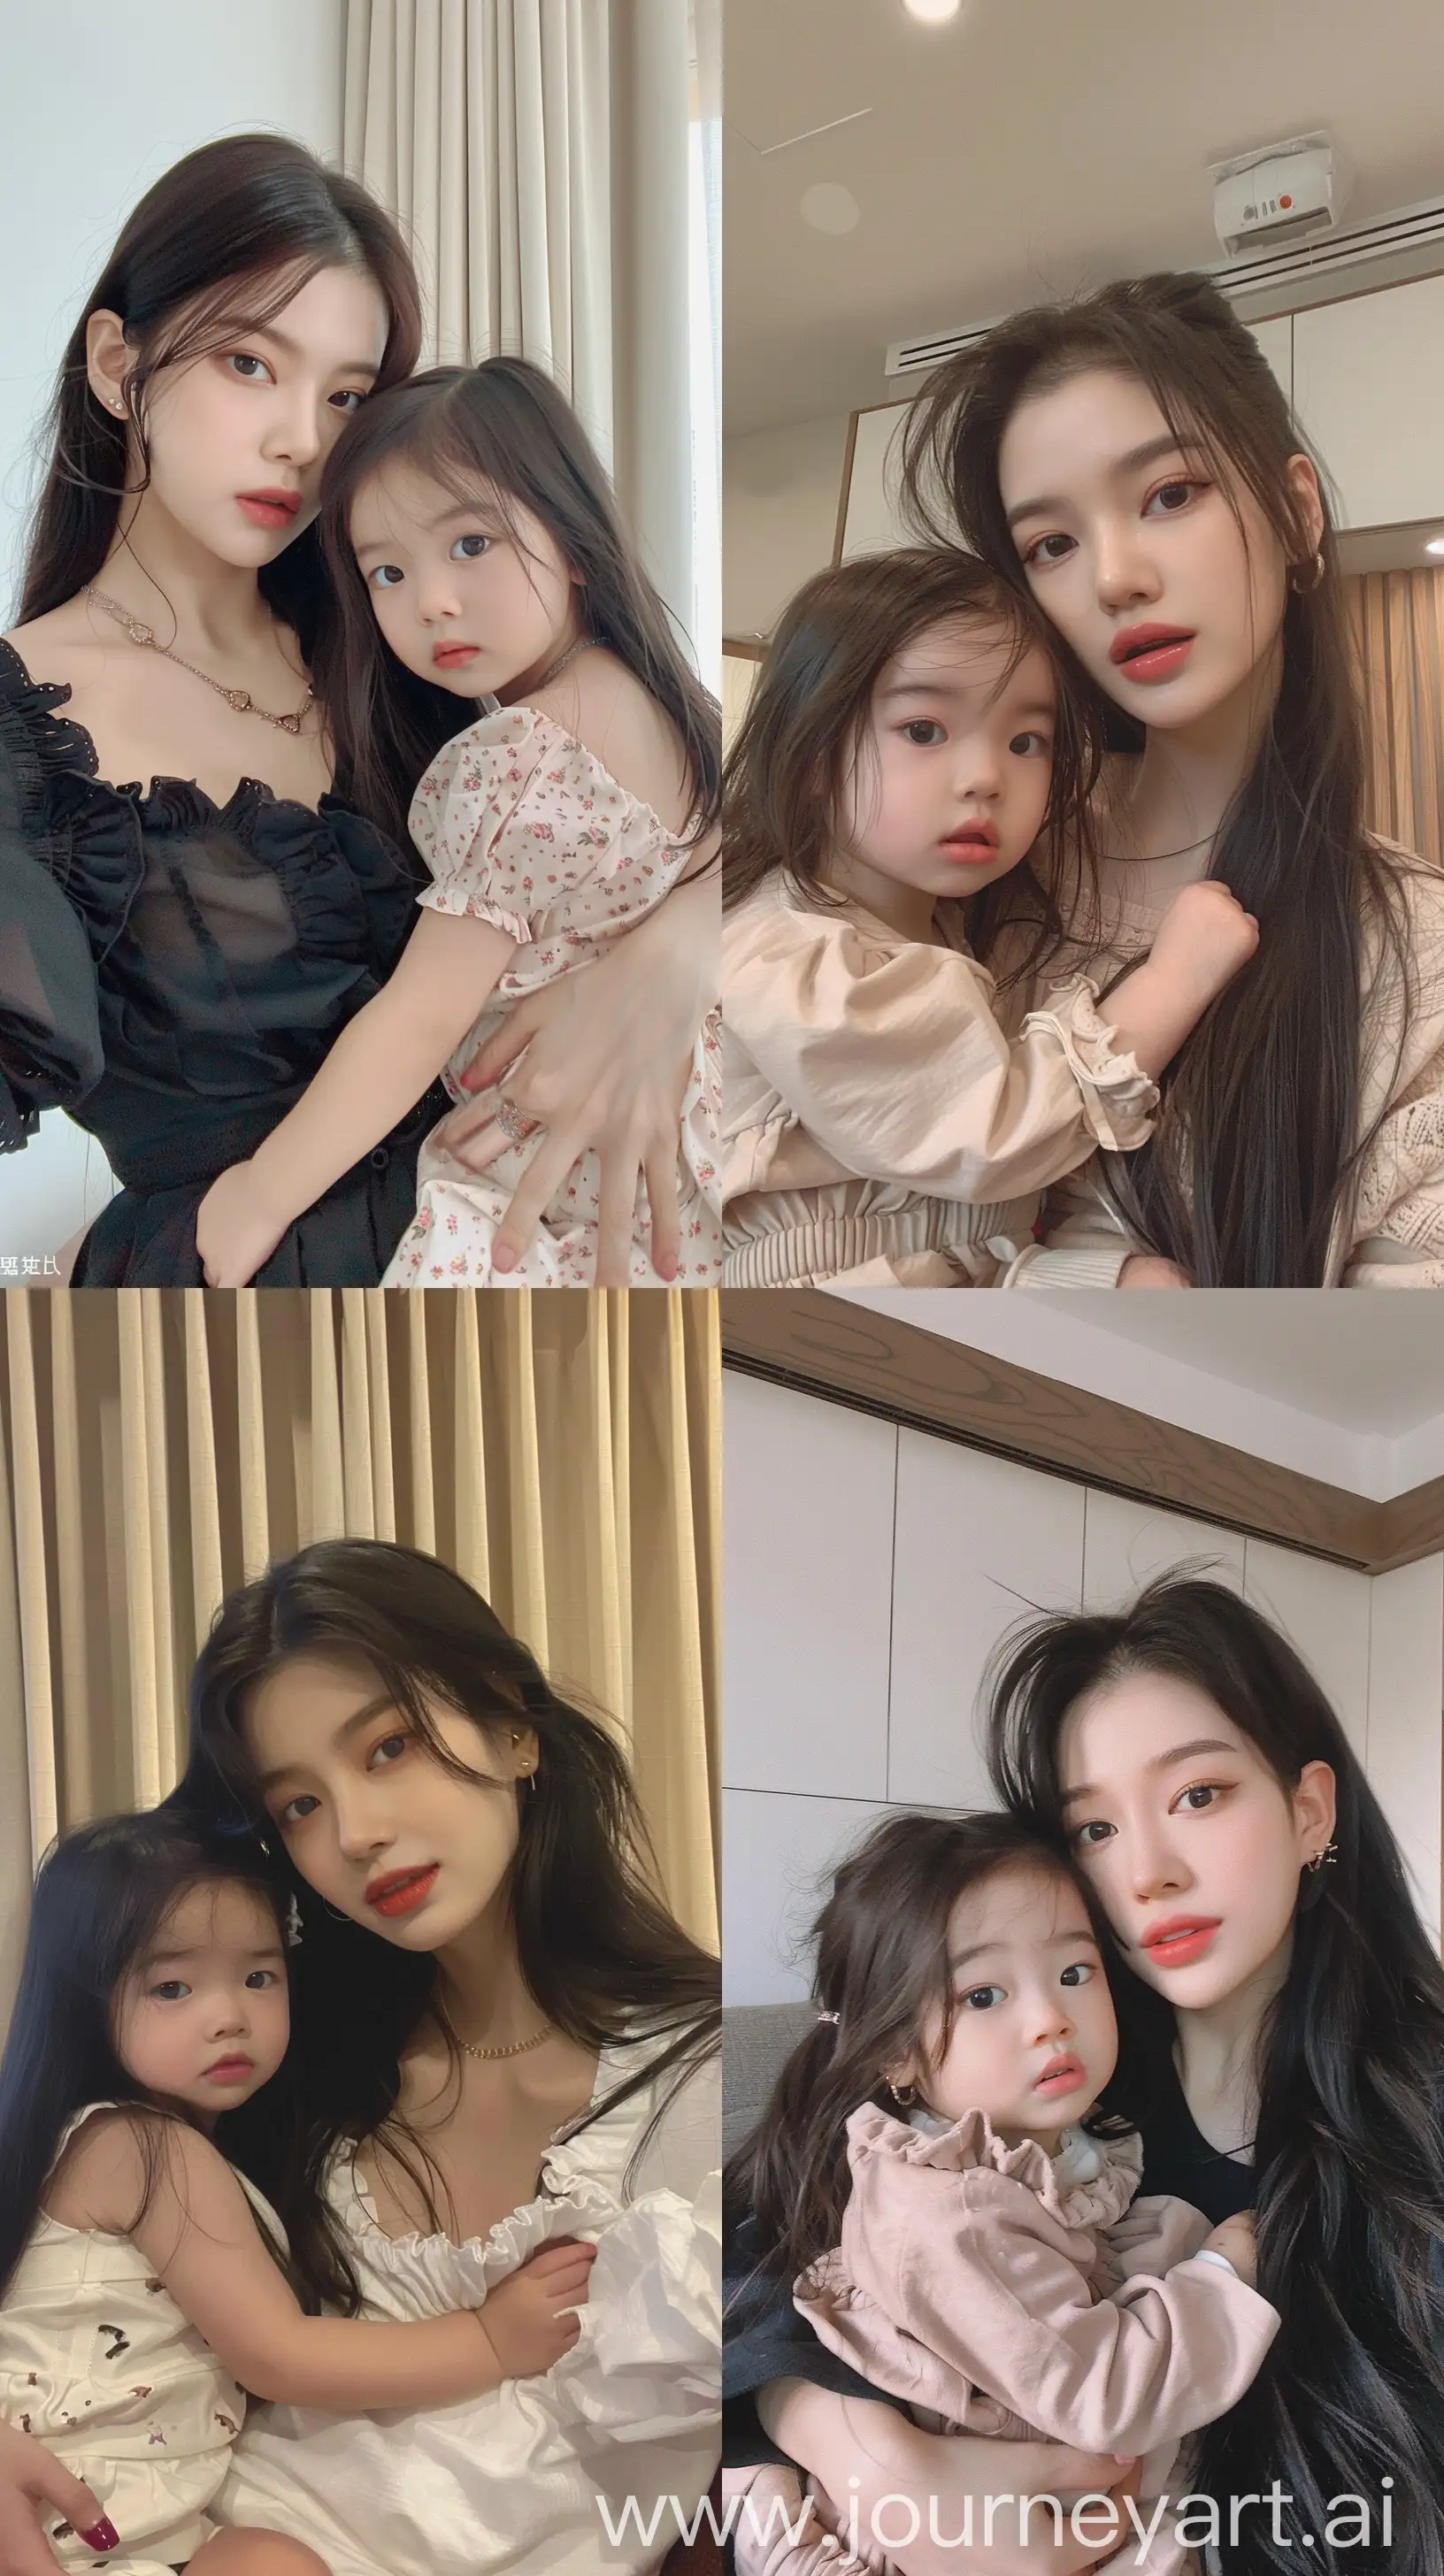 Blackpinks-Jennie-Captures-Aesthetic-Moment-with-LookAlike-Toddler